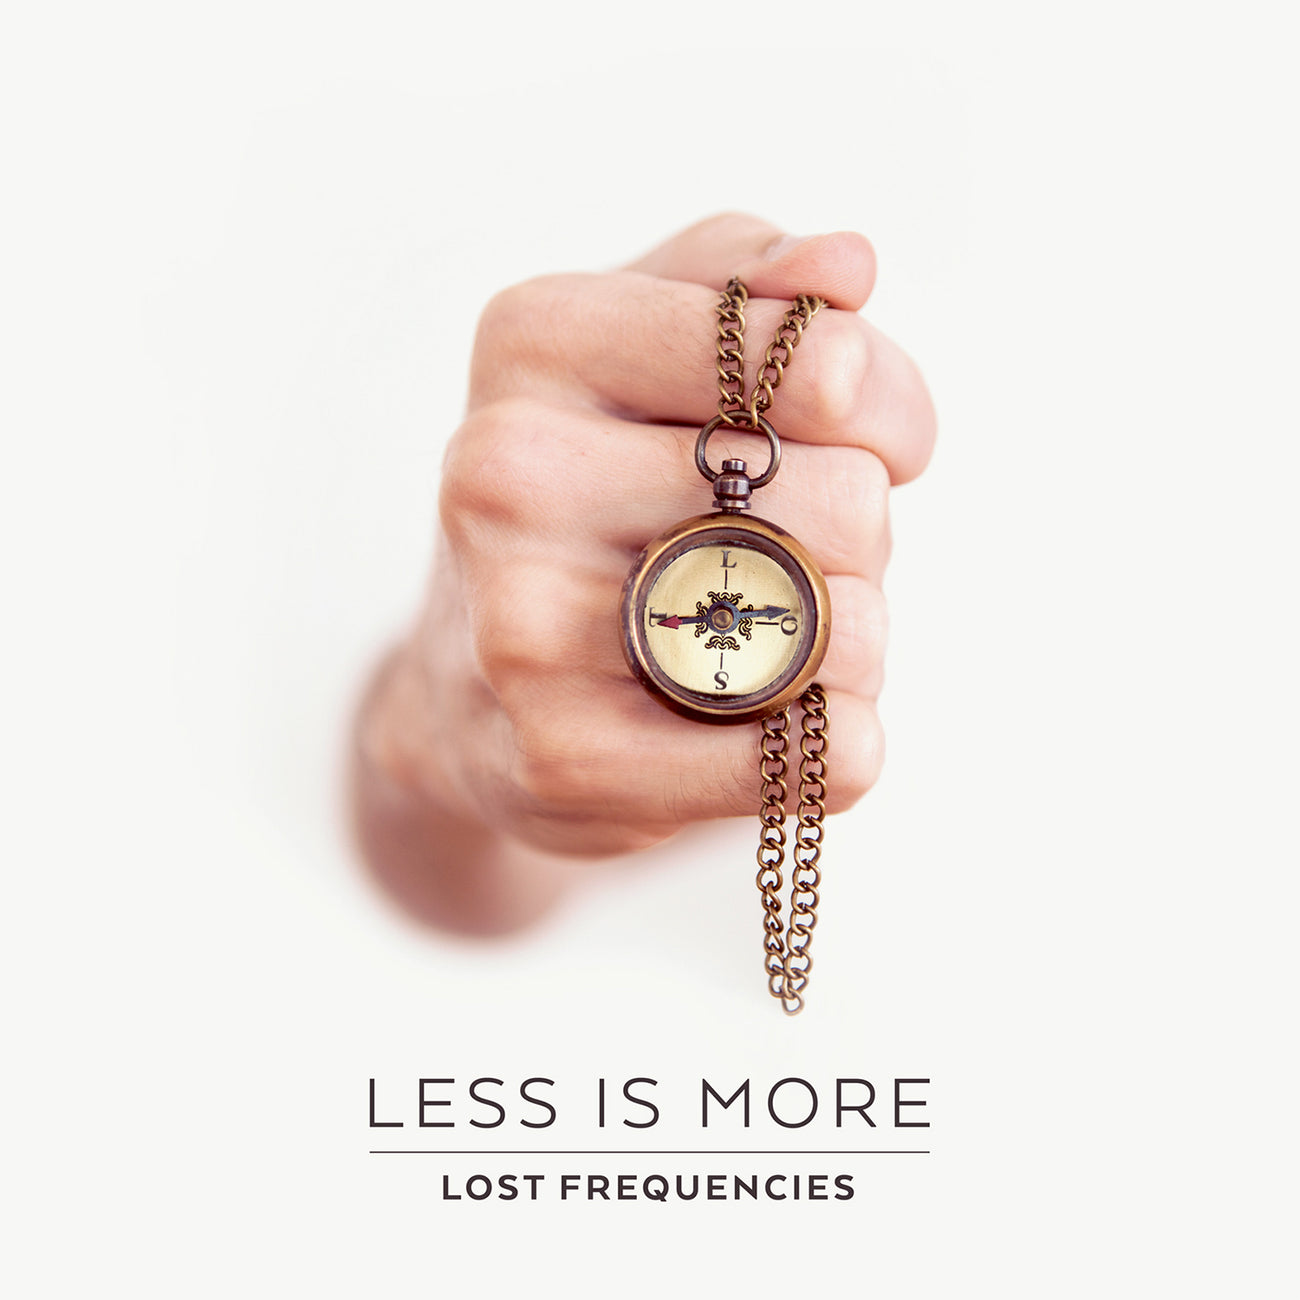 Lost Frequencies - Less is More (Vinyl)